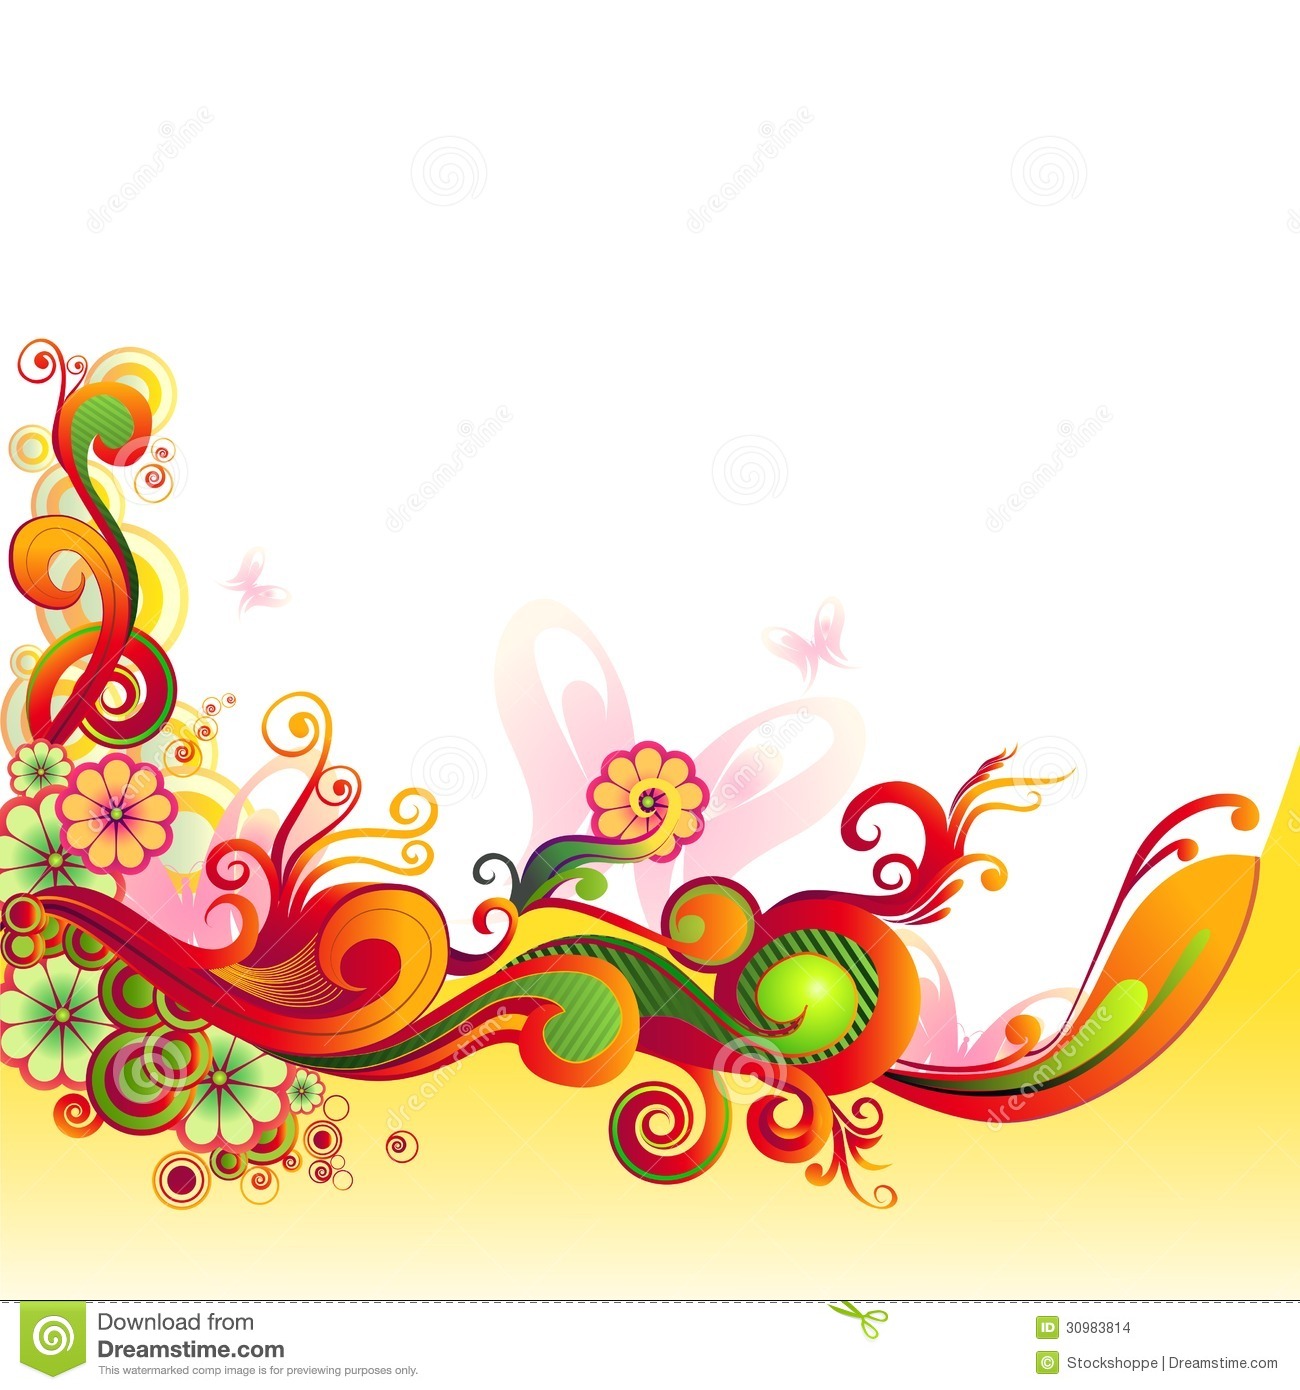 Colorful Floral Swirl Vector Graphics